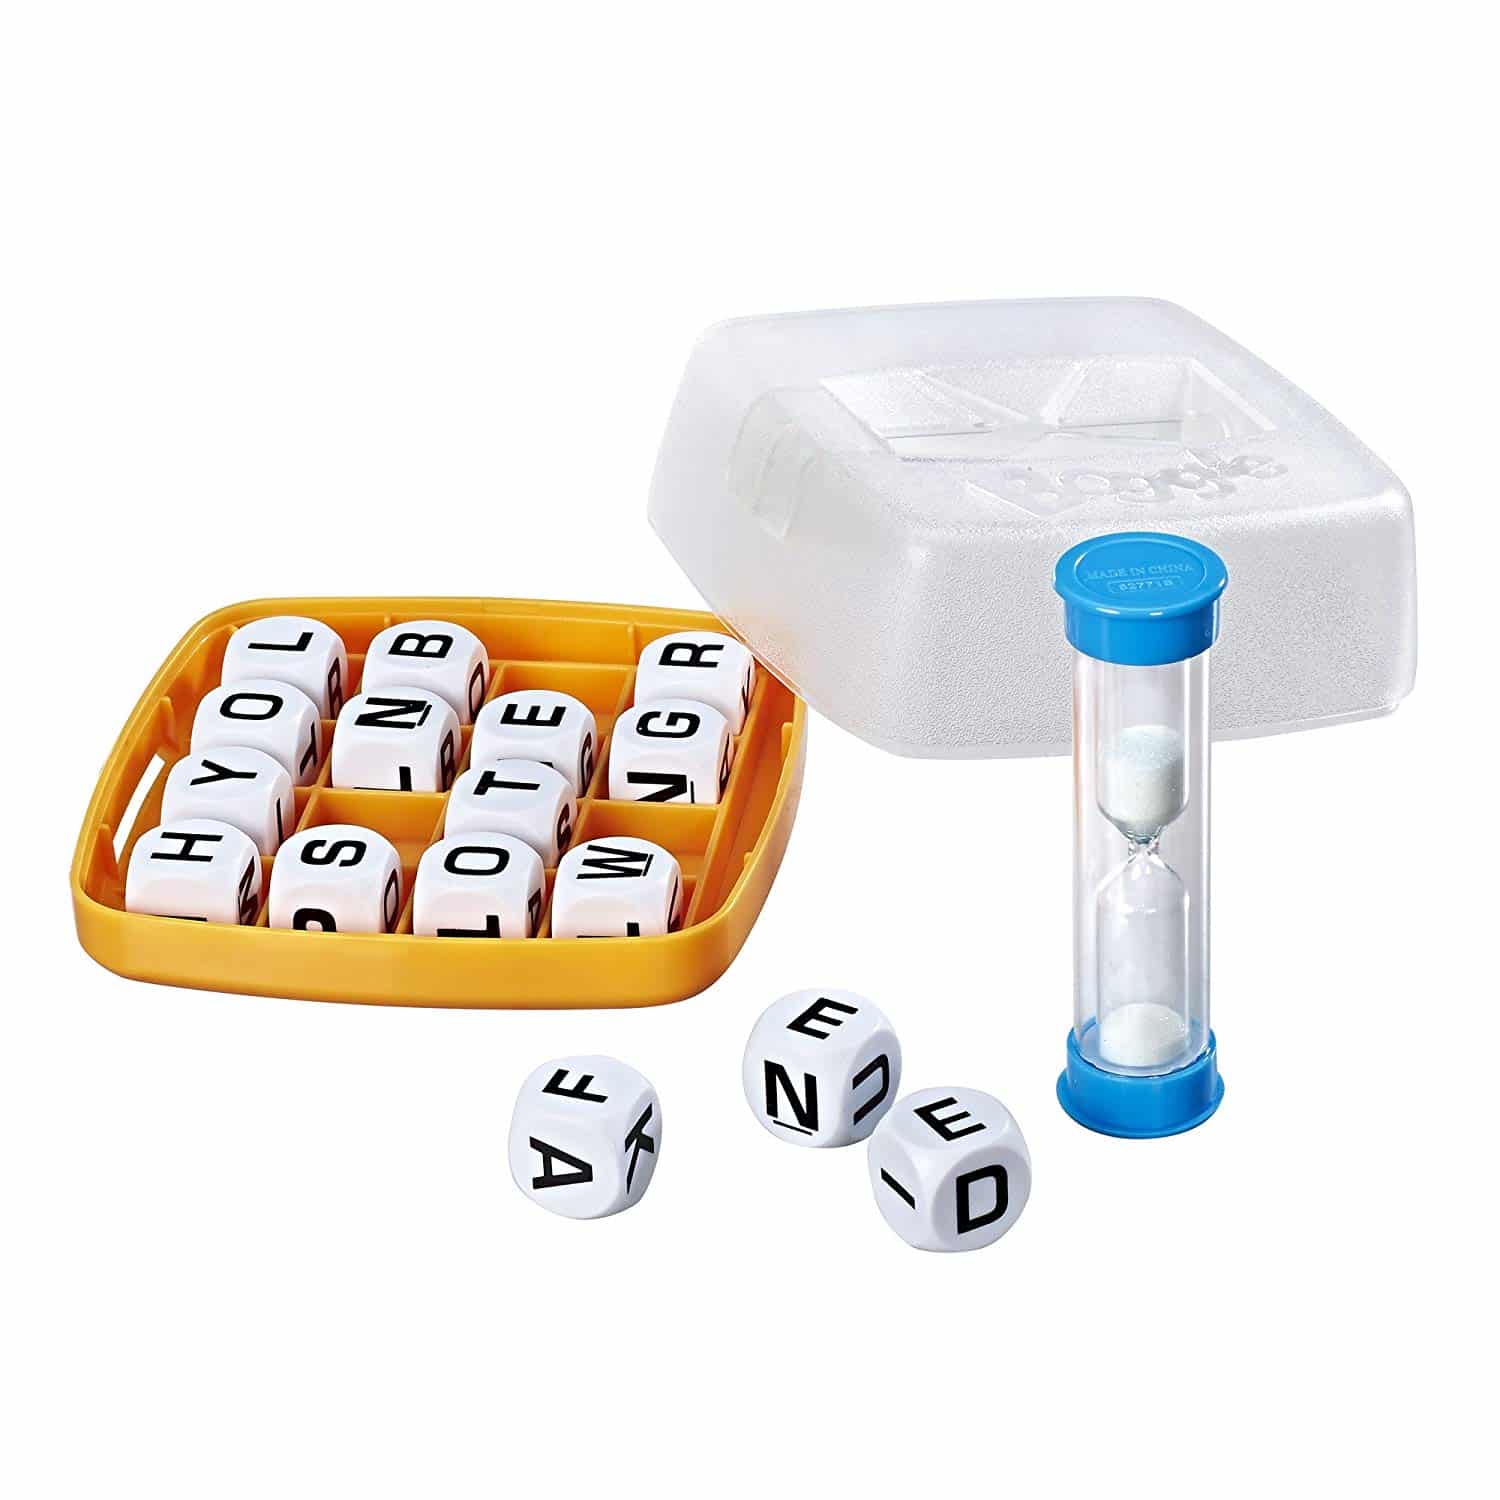 DEAL ALERT: Boggle Classic is 42% off!